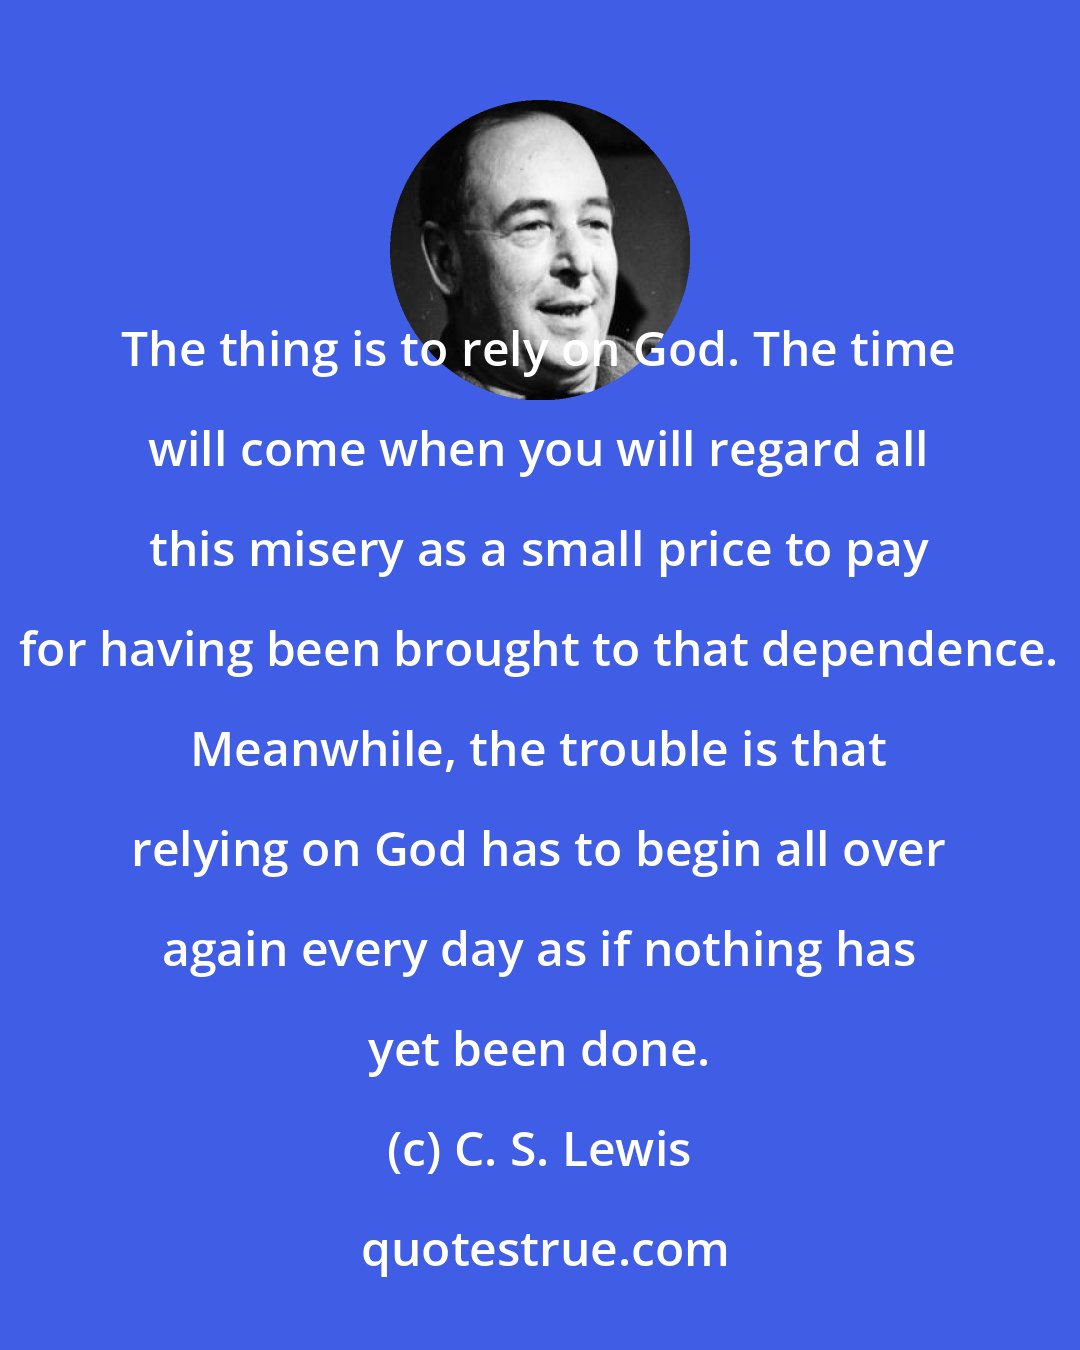 C. S. Lewis: The thing is to rely on God. The time will come when you will regard all this misery as a small price to pay for having been brought to that dependence. Meanwhile, the trouble is that relying on God has to begin all over again every day as if nothing has yet been done.